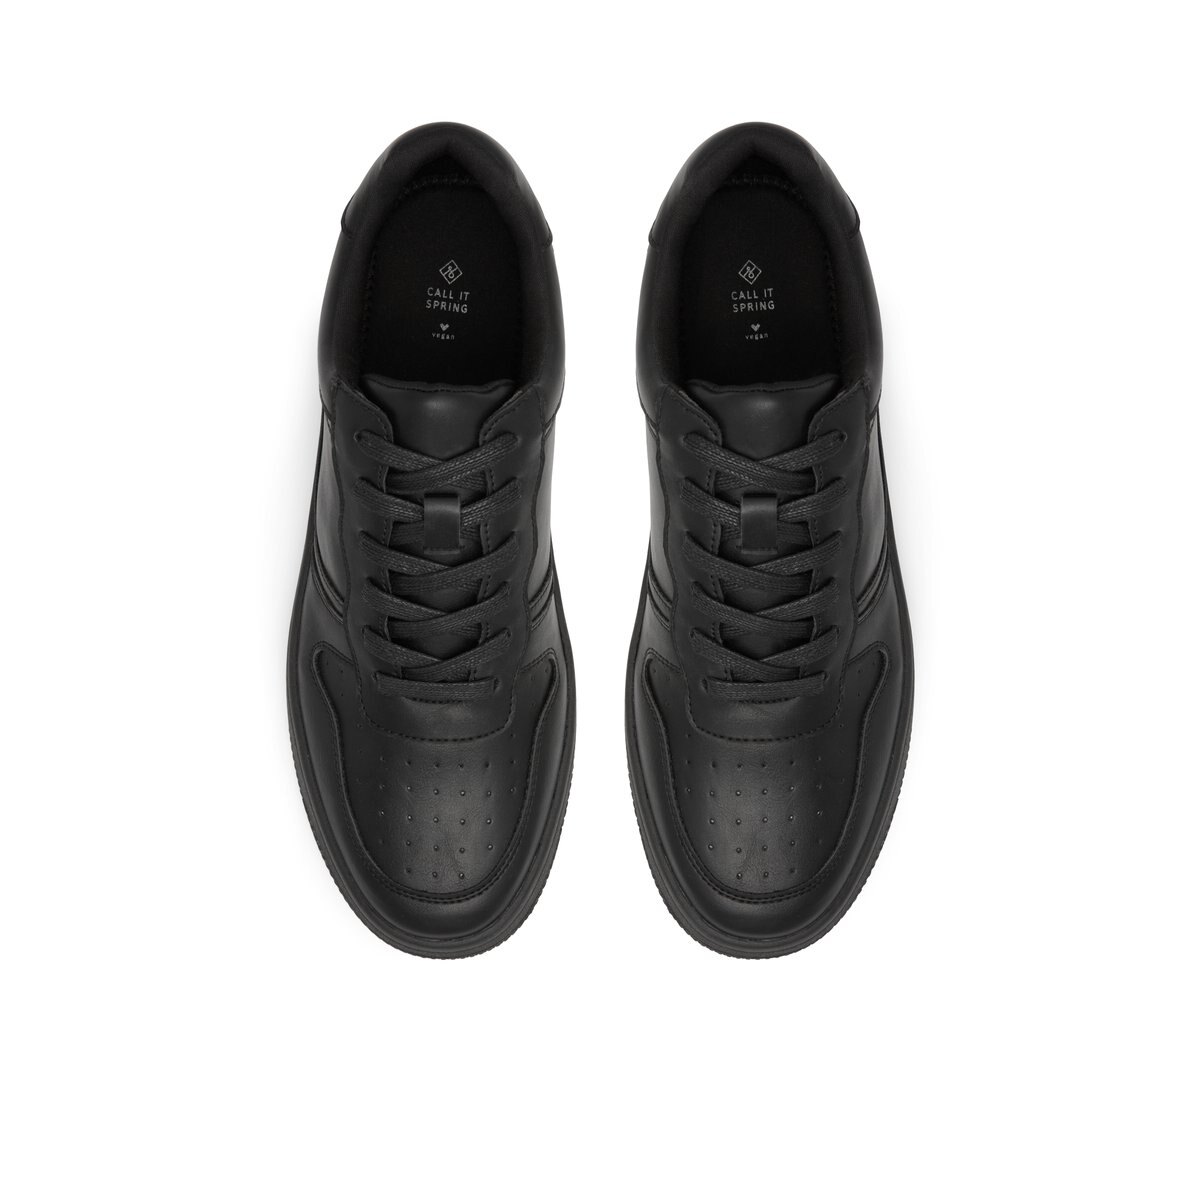 Freshh Black Men's Lace Up Sneakers | Call It Spring US